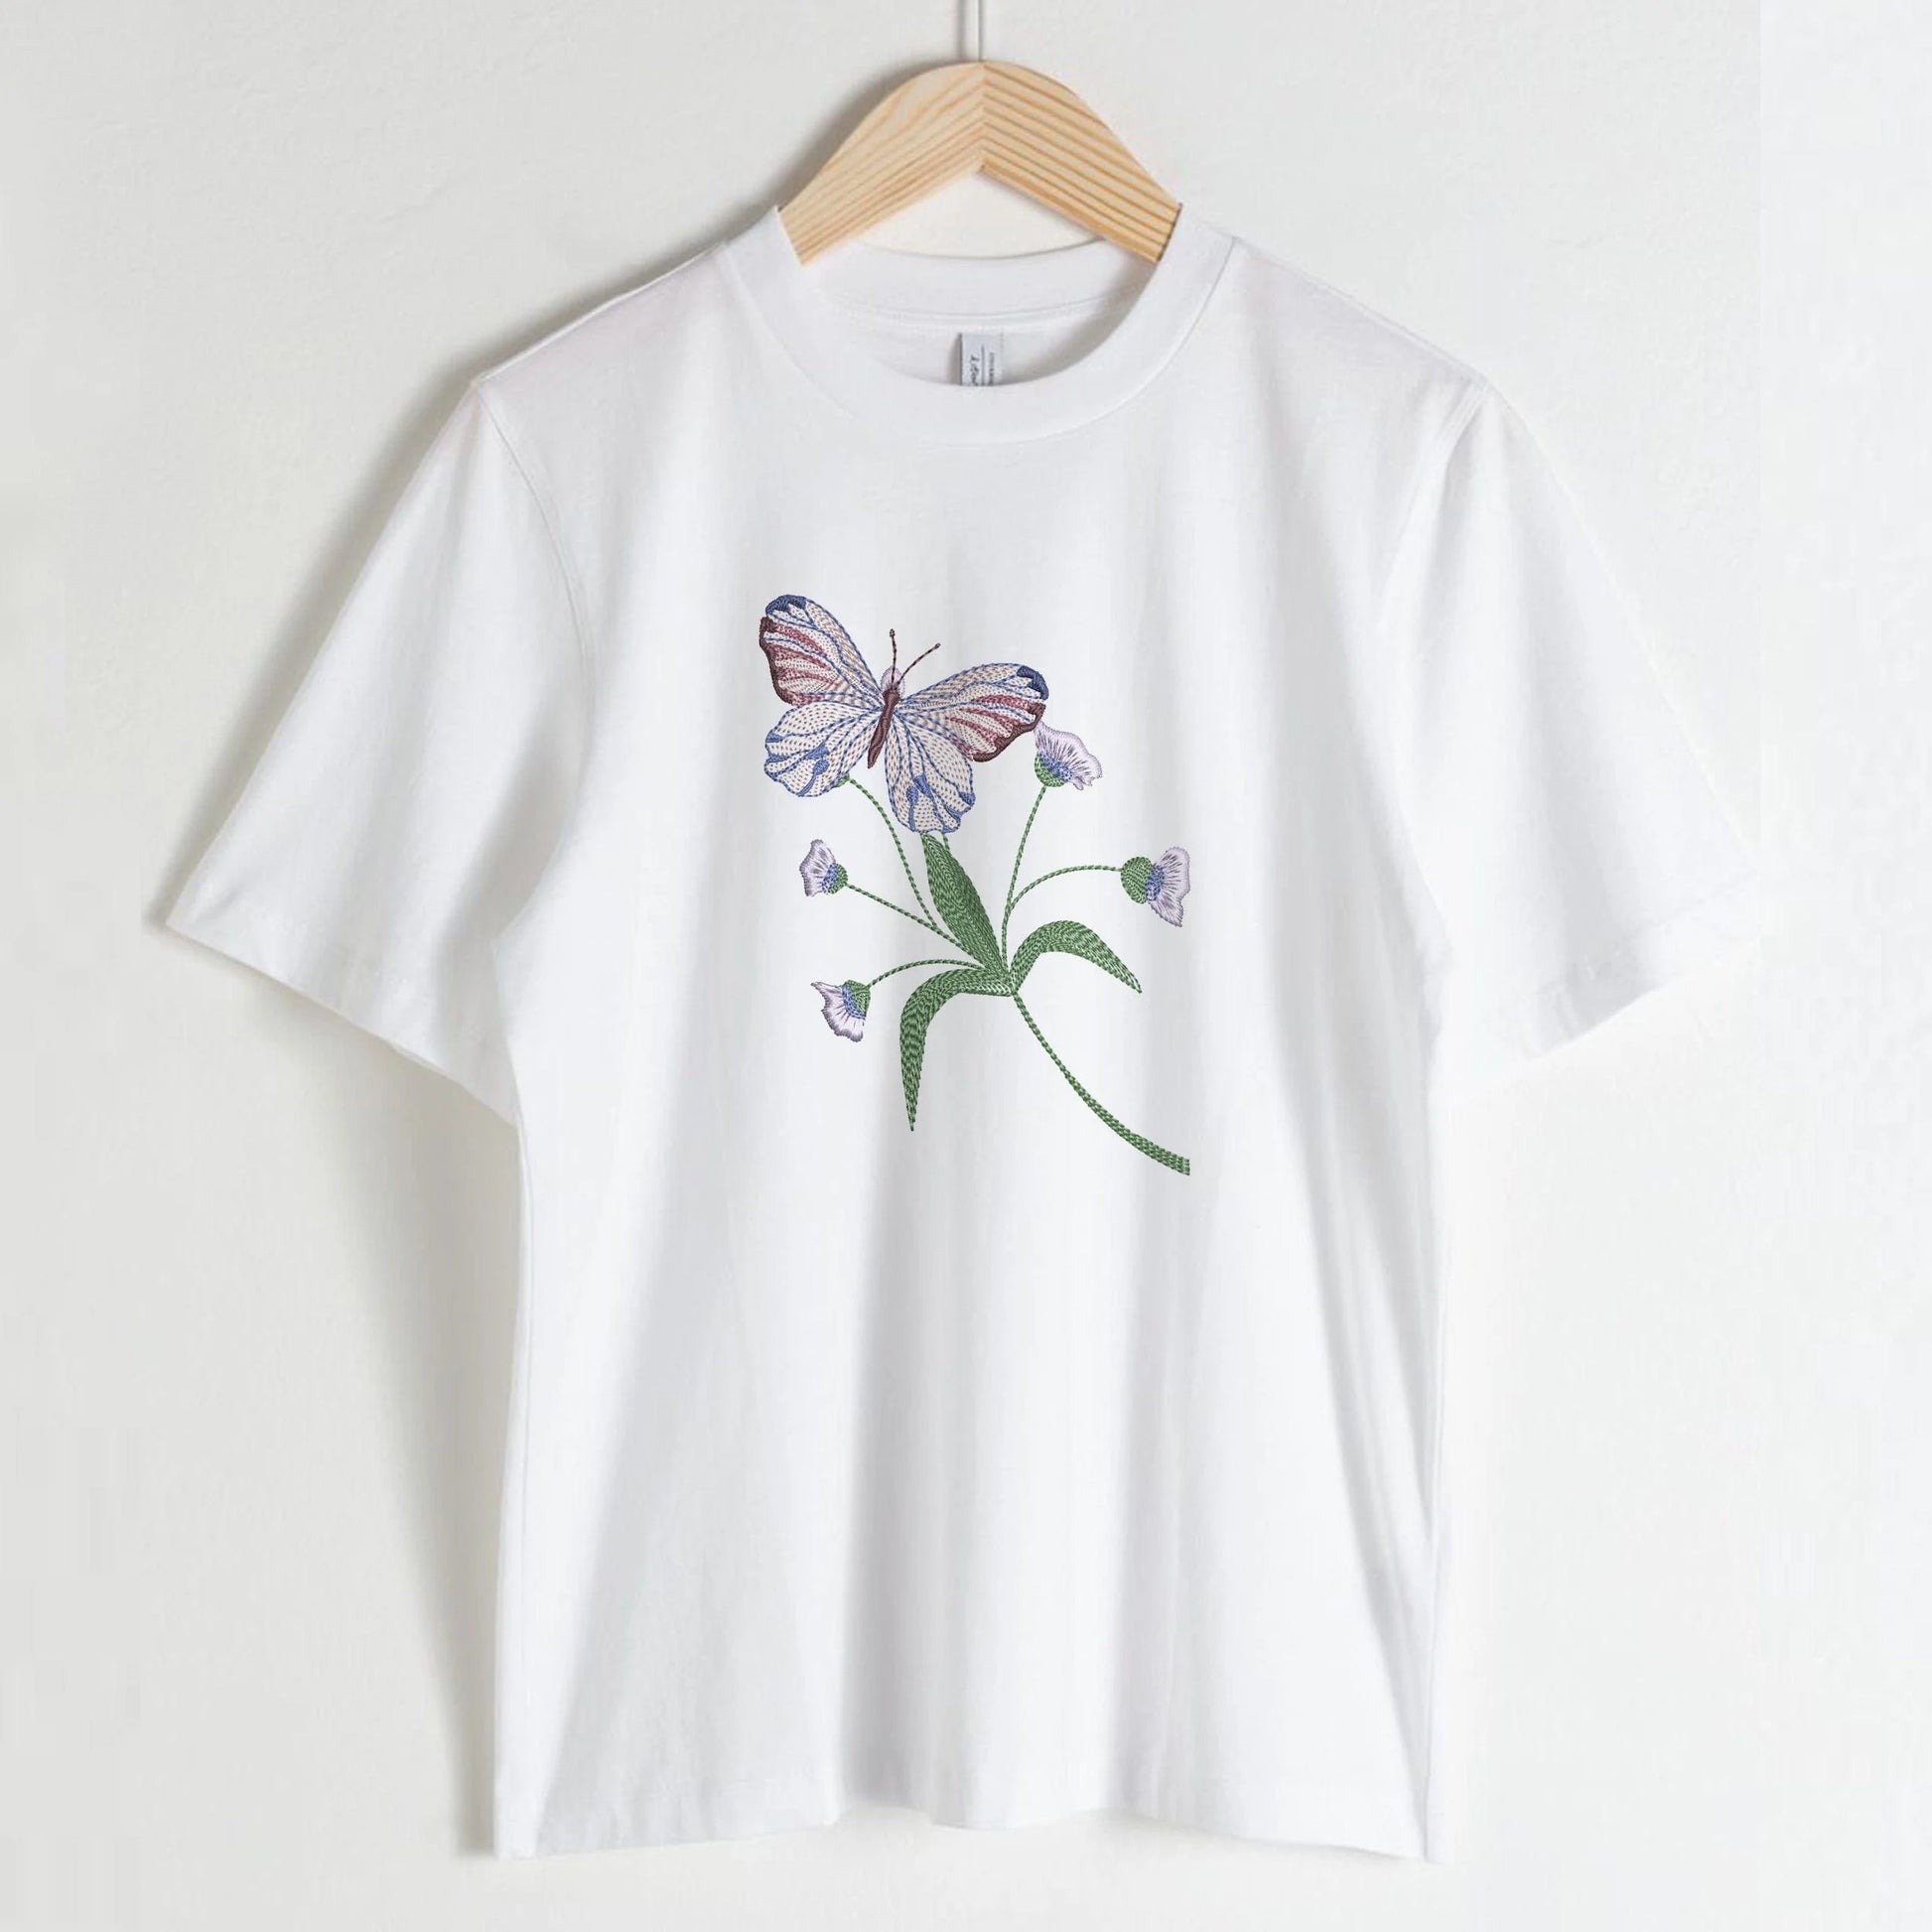 Flower Butterfly Machine Embroidery Design on white t-shirt